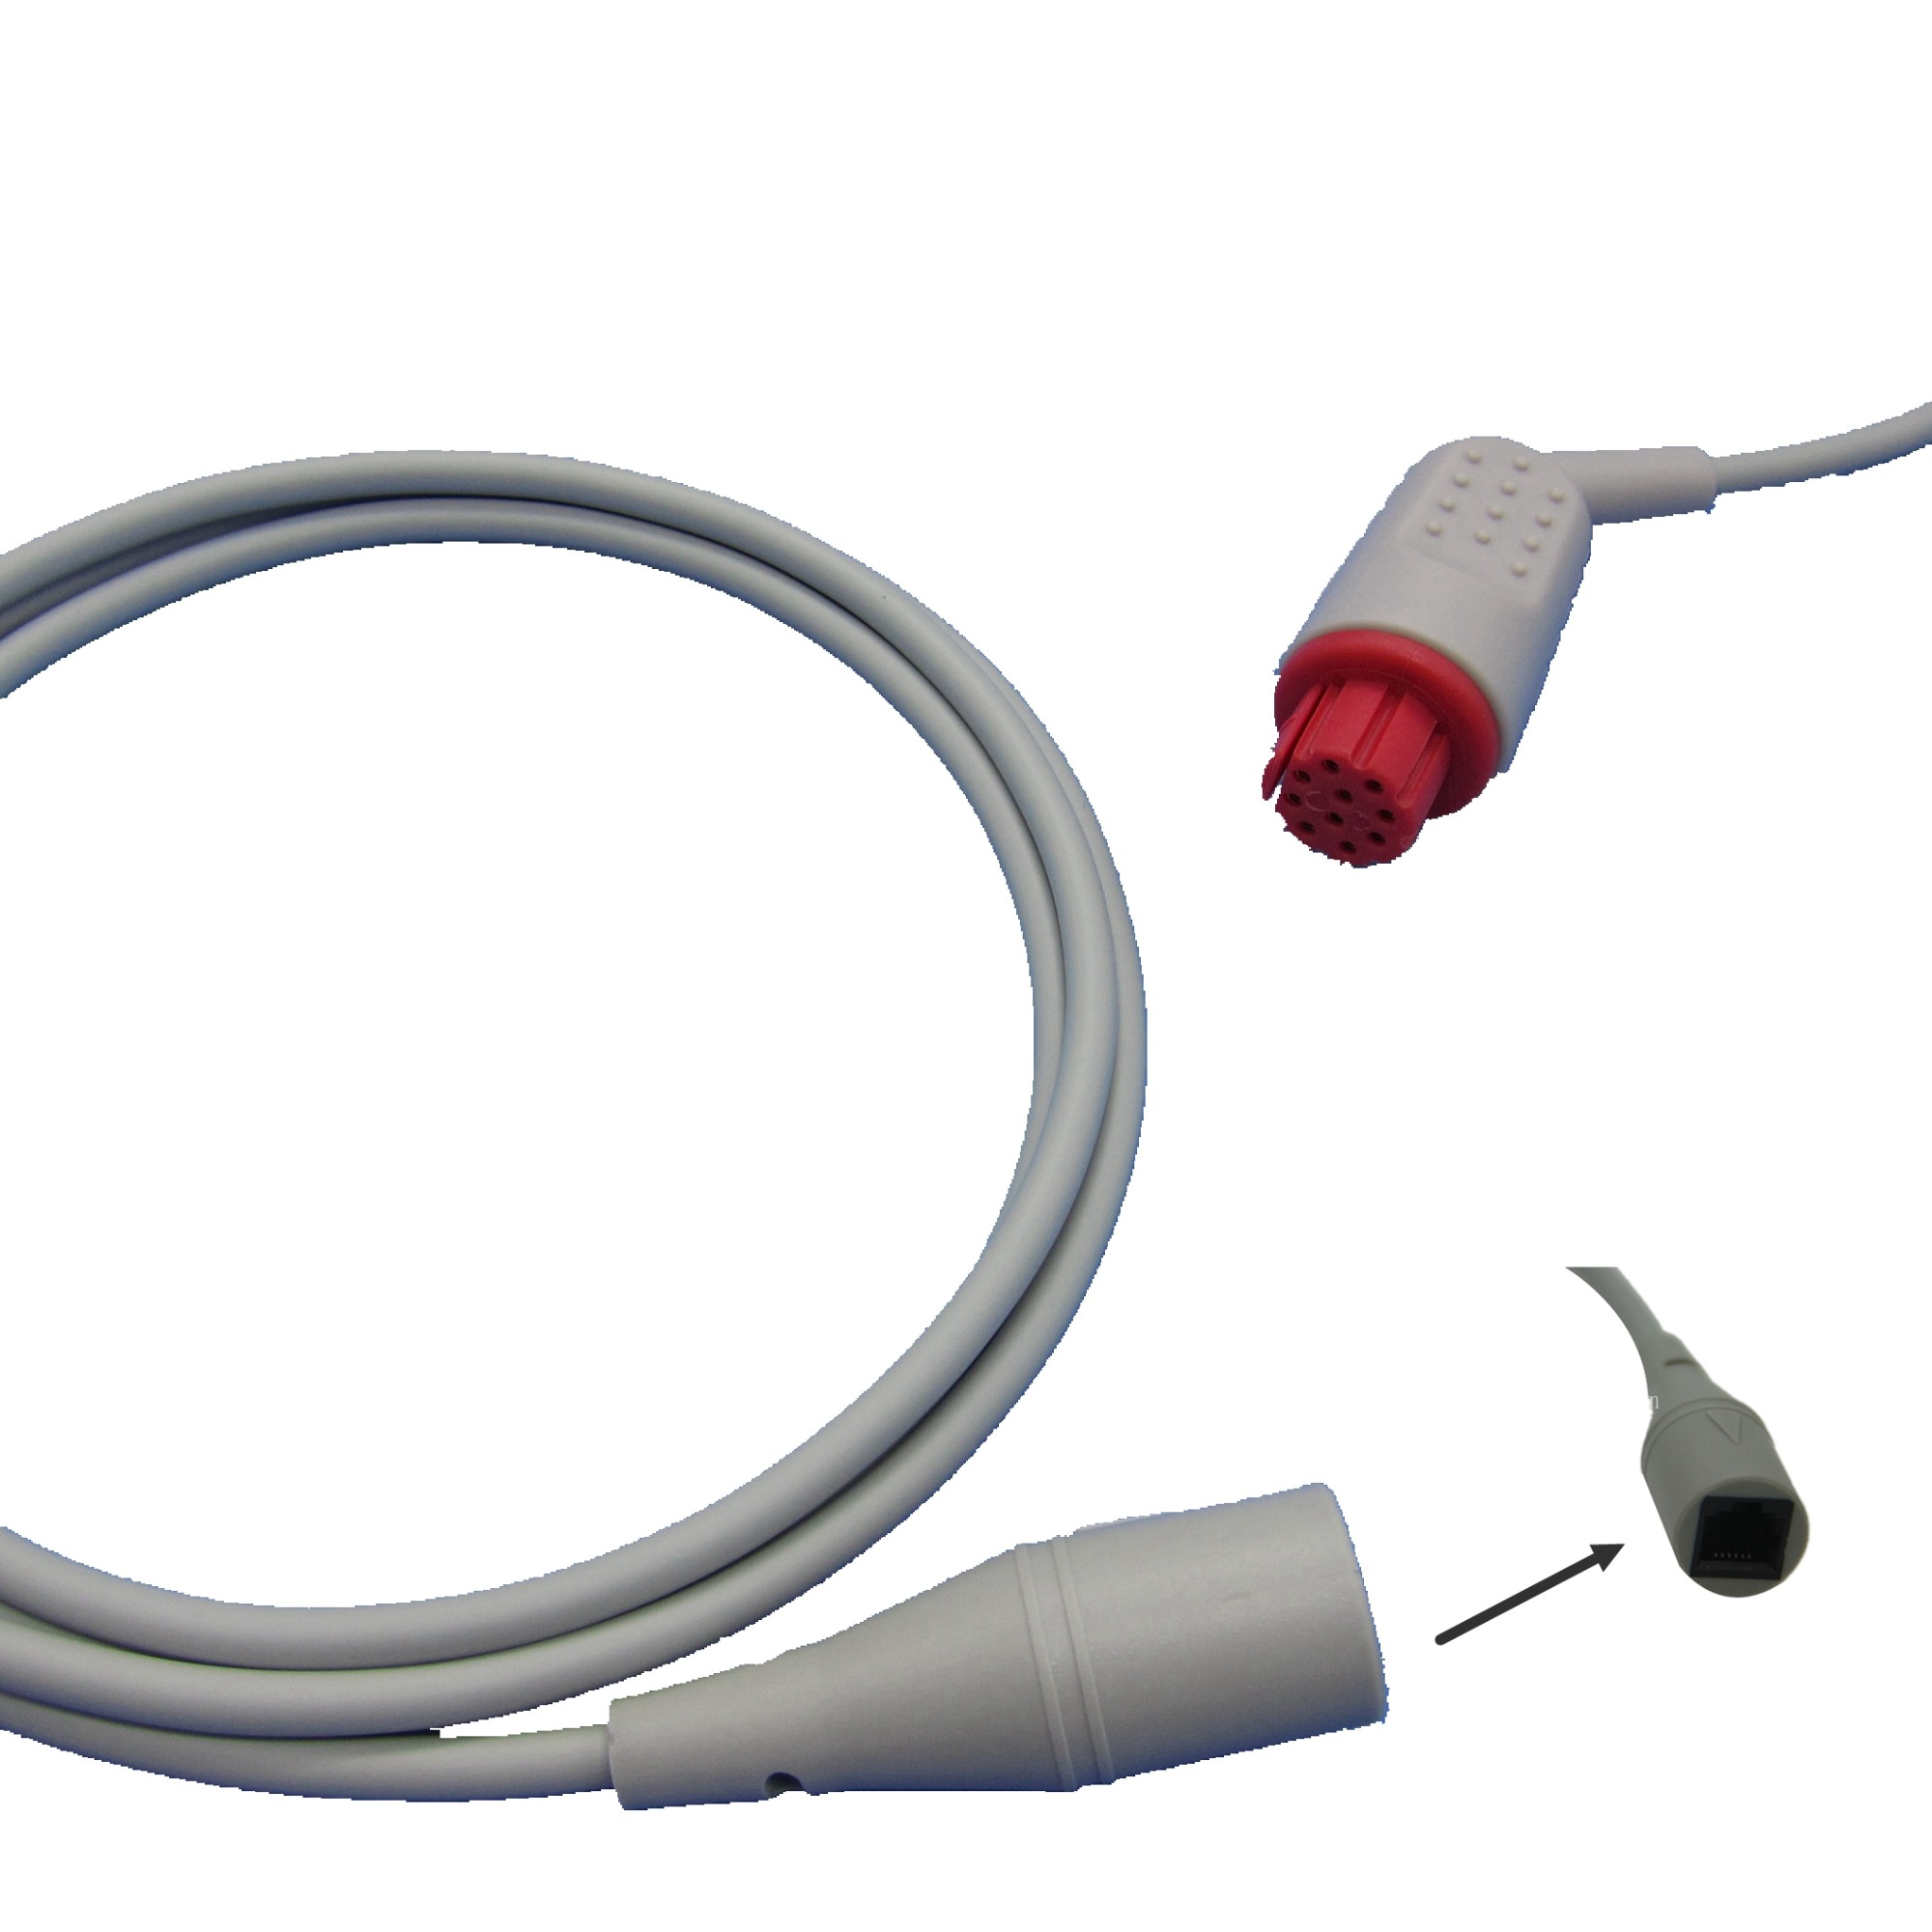 IBP Cable With Utah BD ABBOTT Edward Medex Connector For Datex Pressure Transducer IBP Adapter